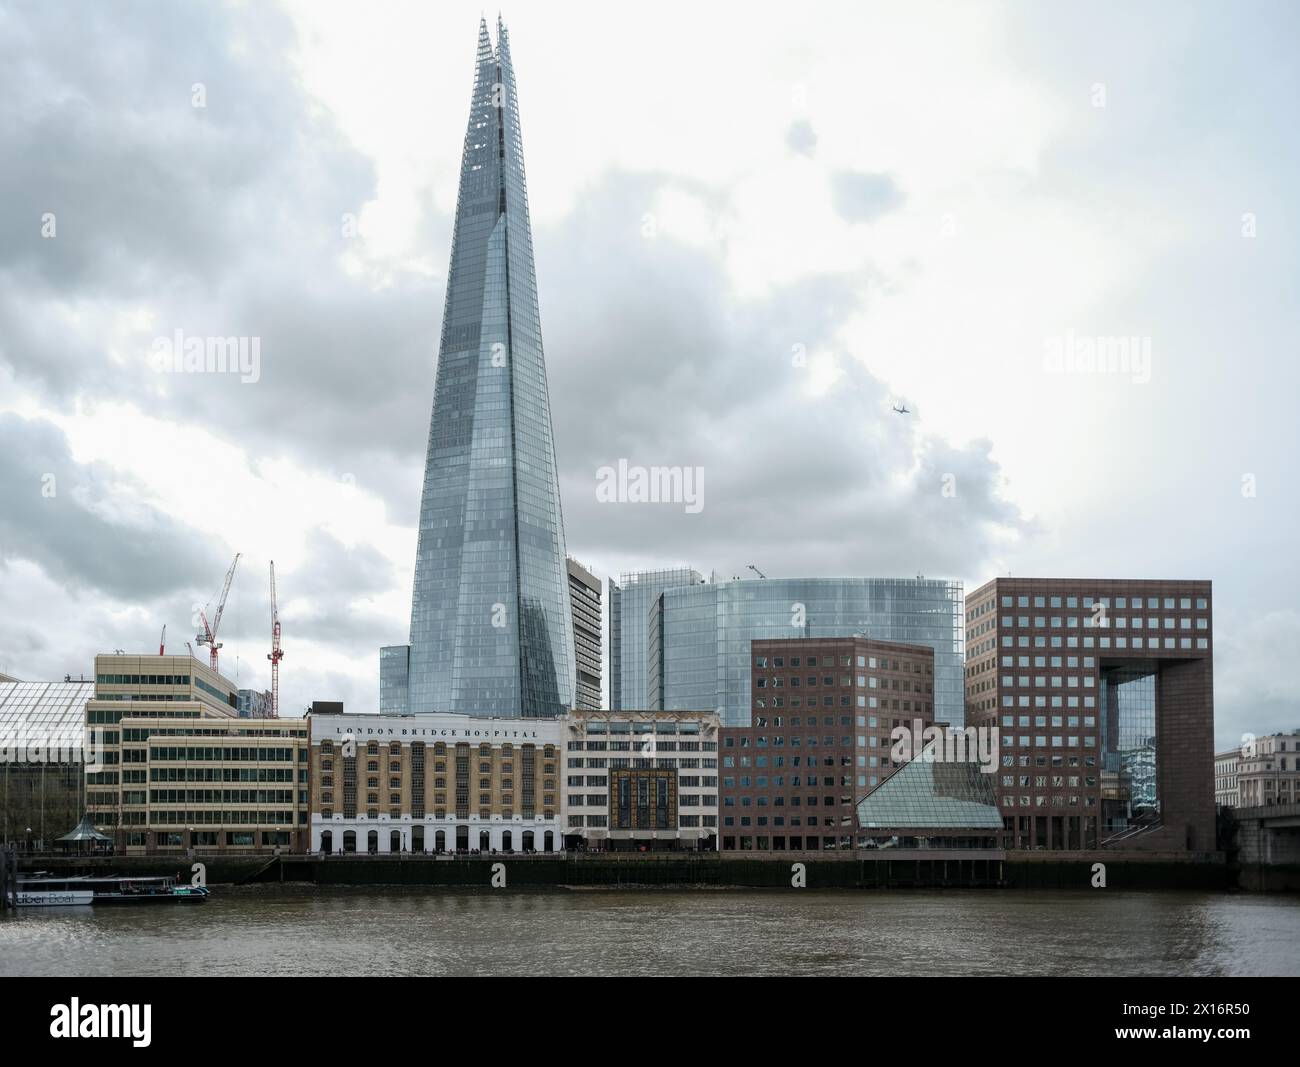 The Shard Also Referred To As The Shard London Bridge And Formerly